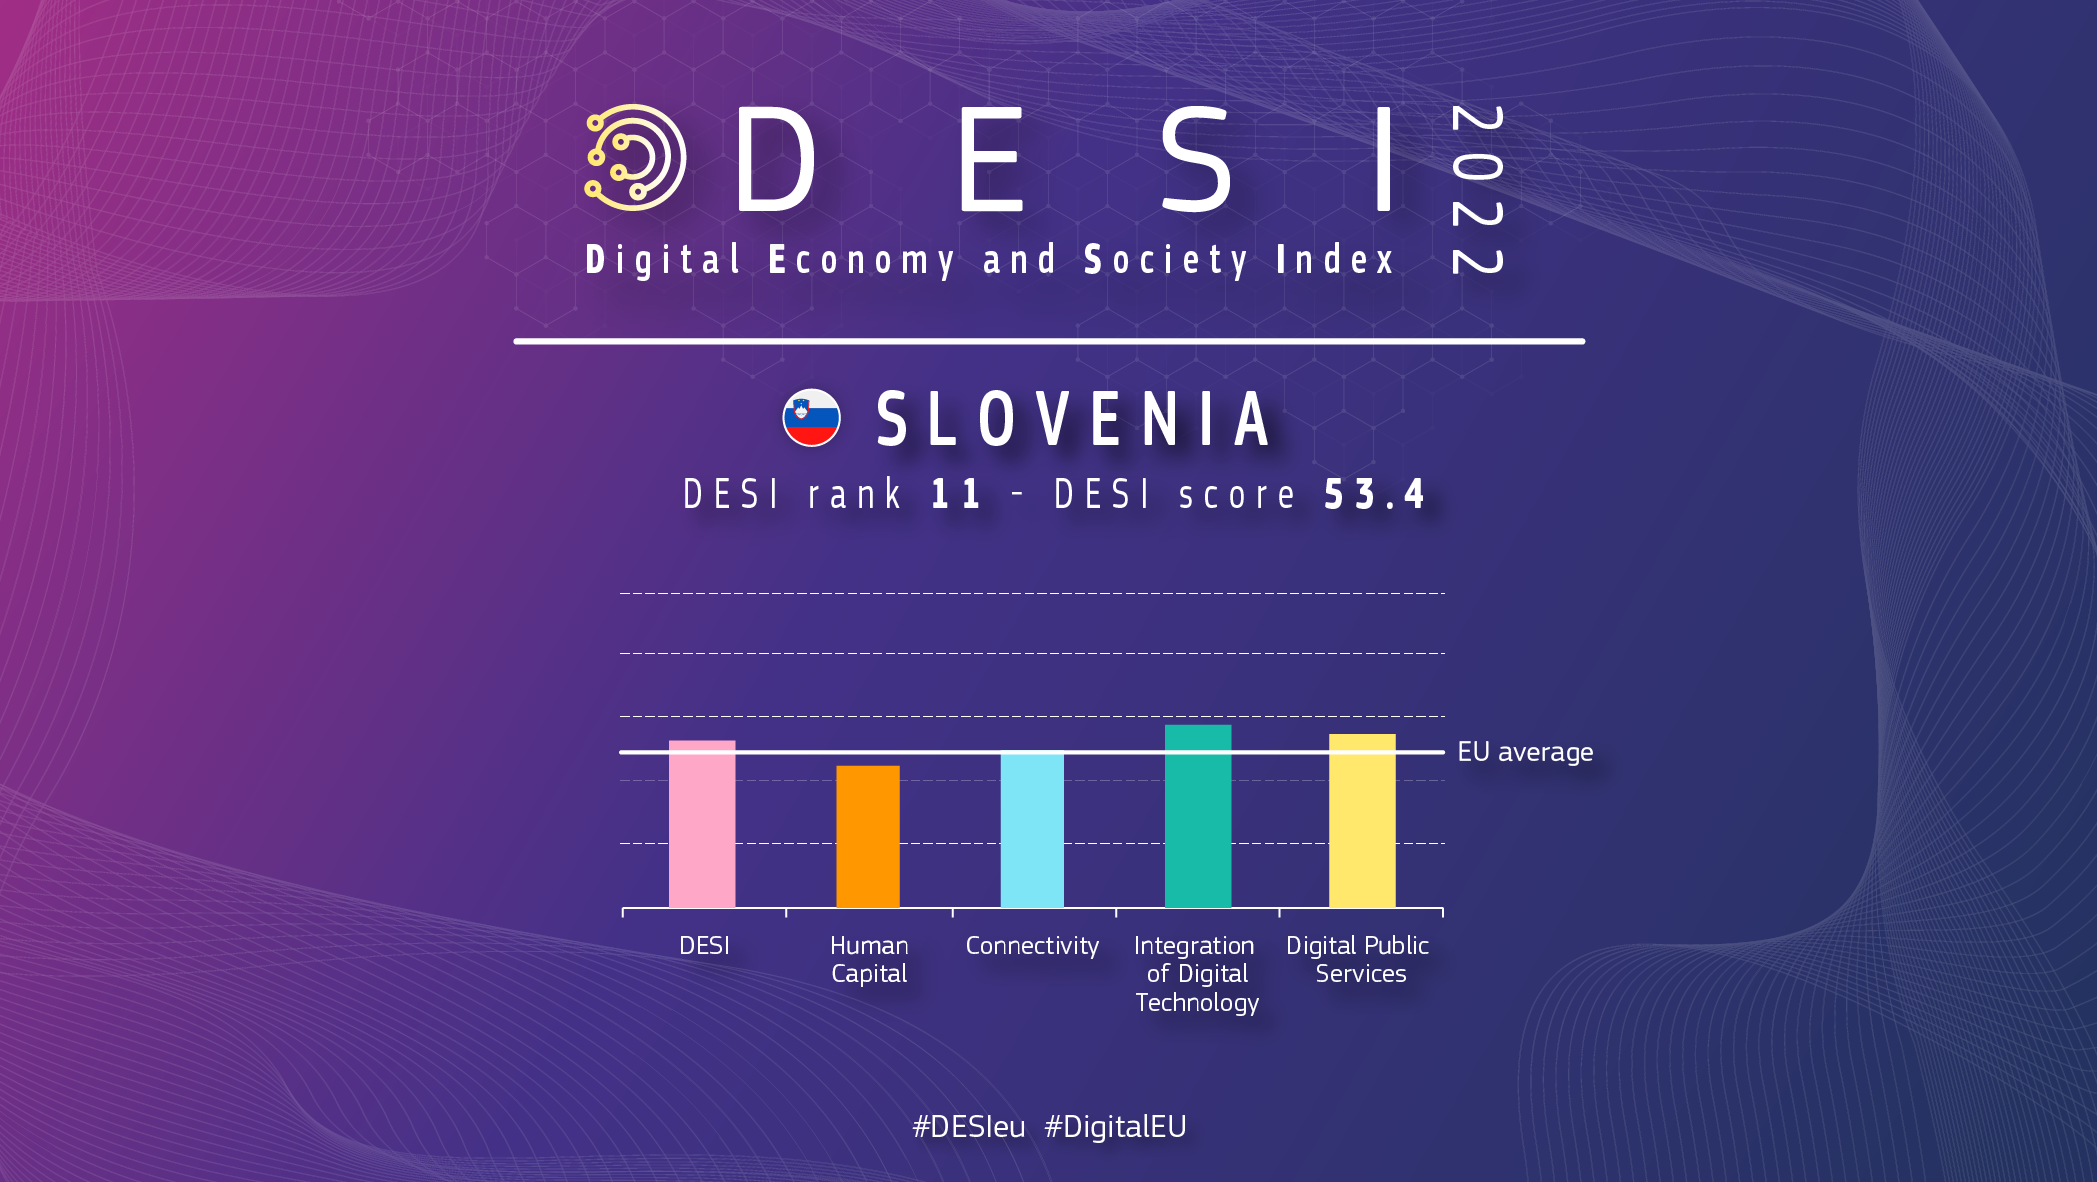 Graphic overview of Slovenia in DESI showing a ranking of 11 with a score of 53.4